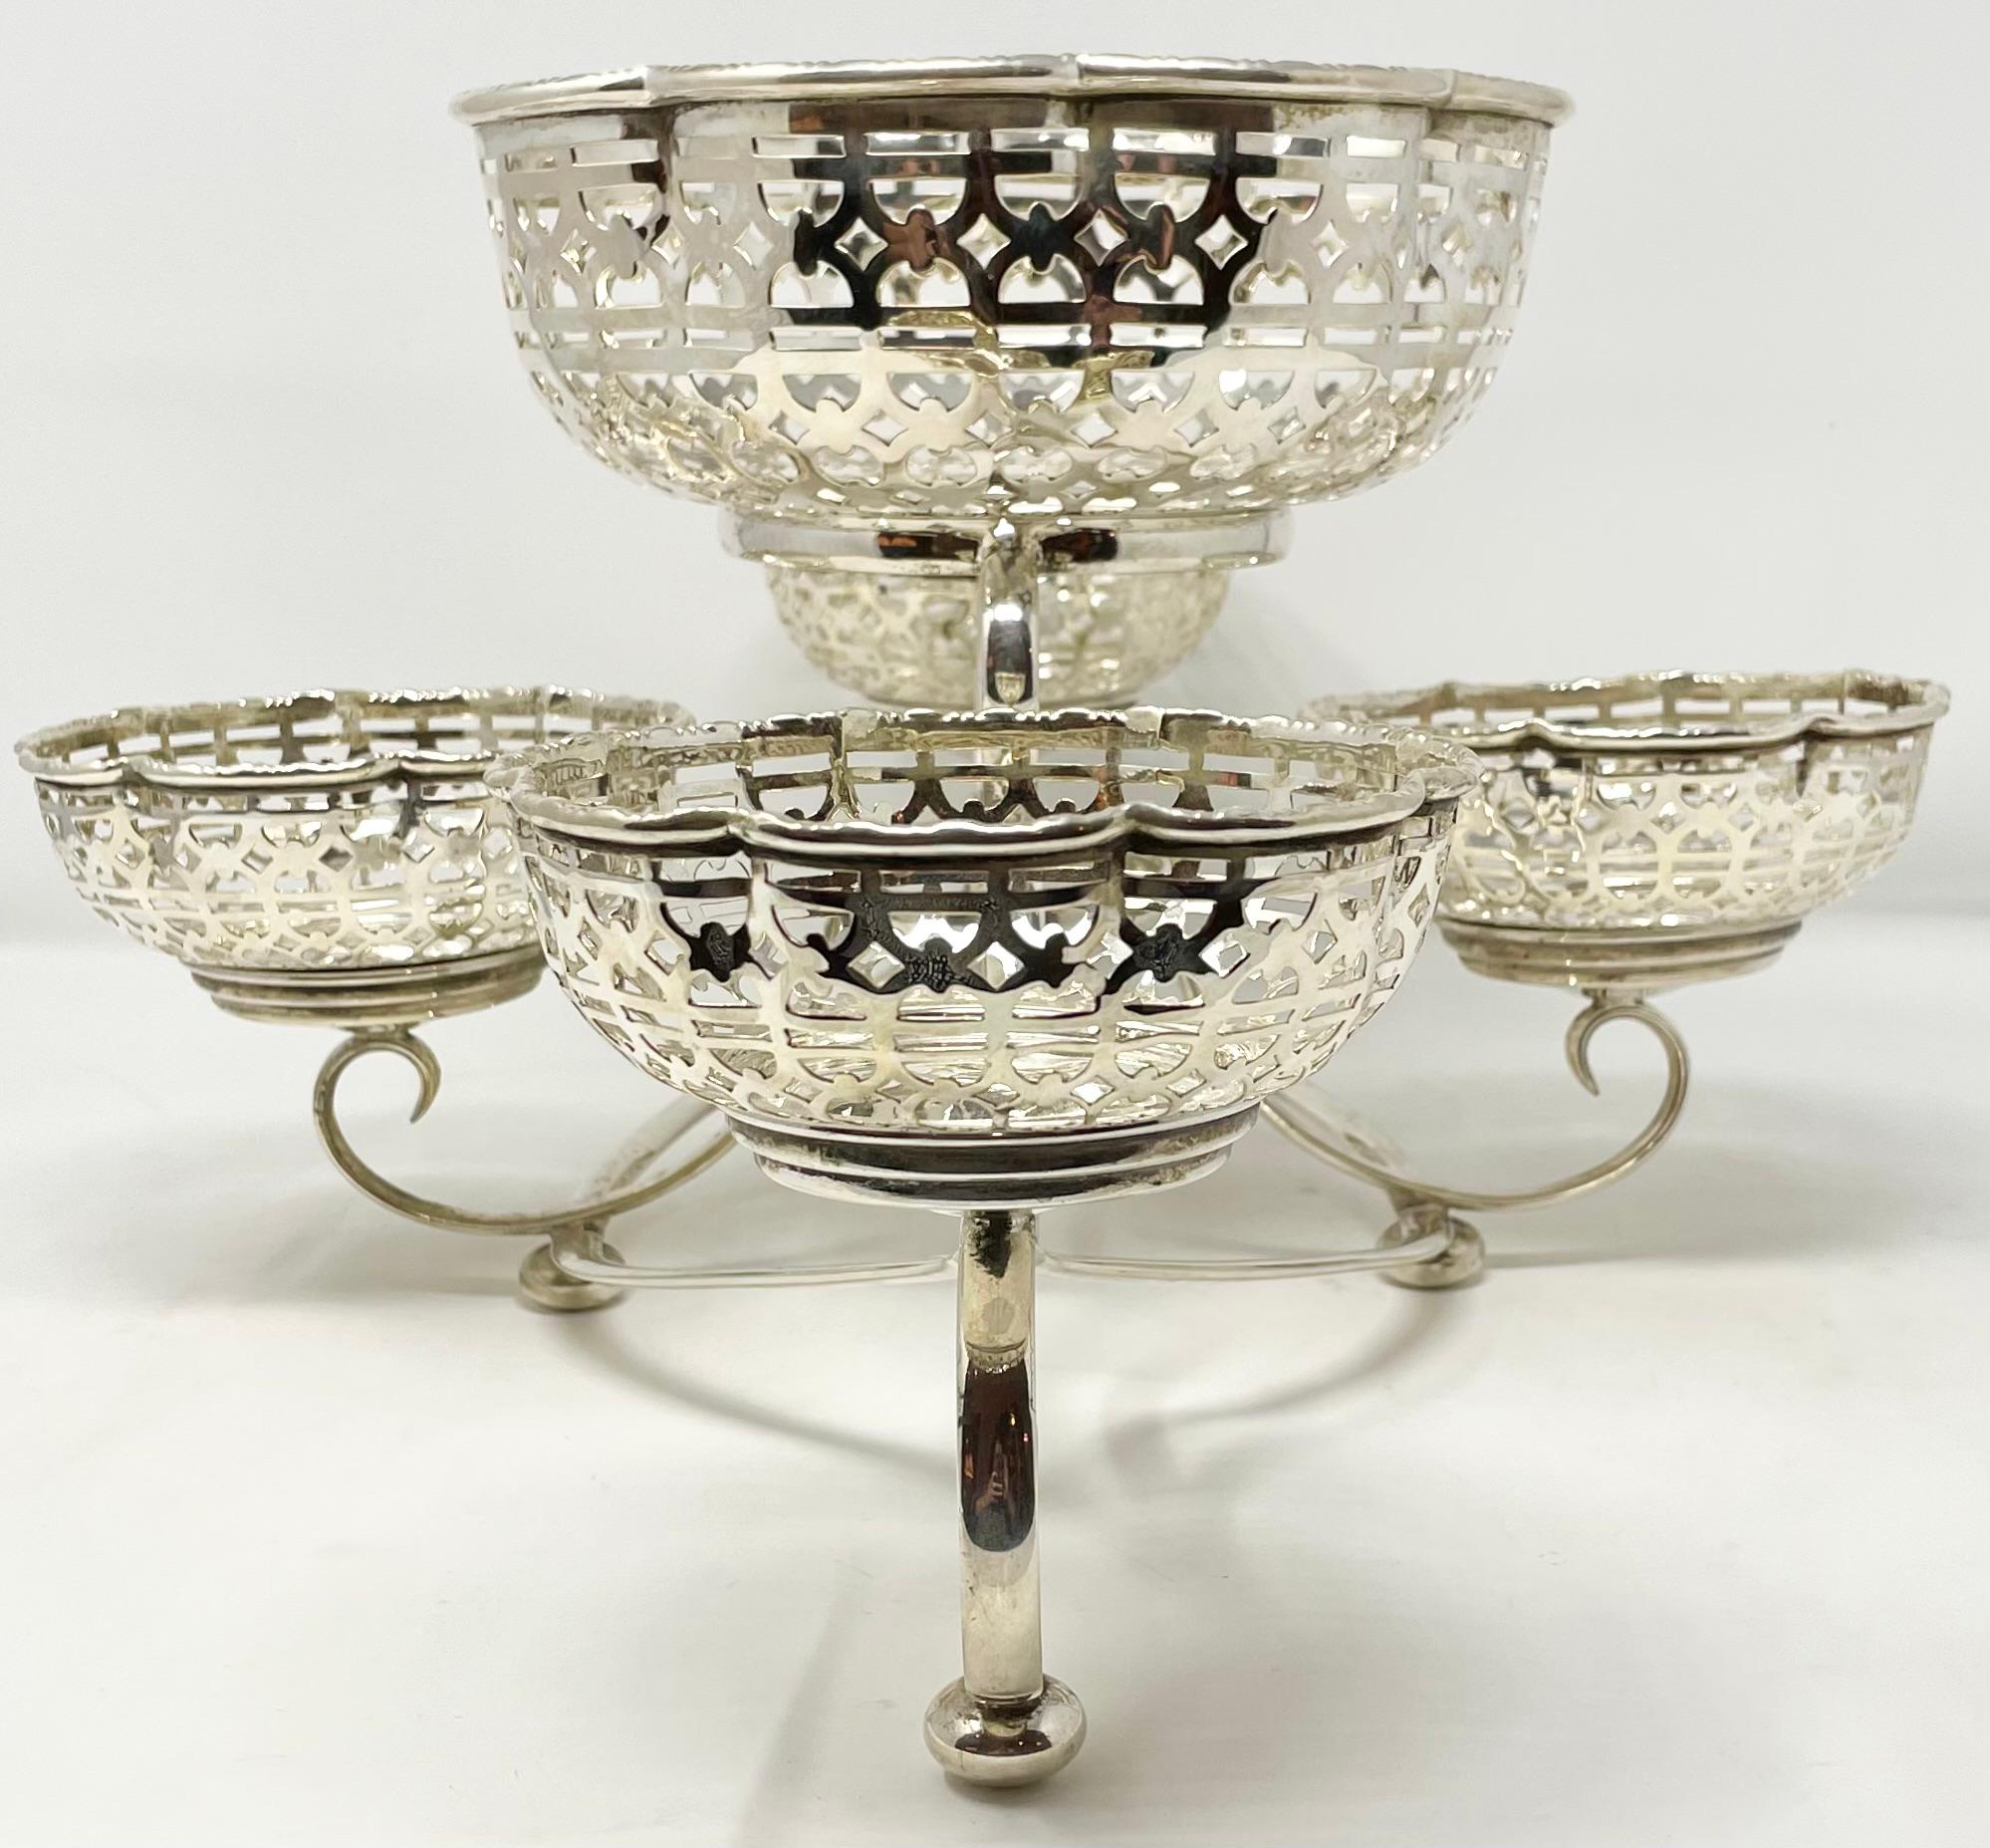 Antique English Silver-Plated 5 Piece Floral Epergne with Piercework, Circa 1900 In Good Condition For Sale In New Orleans, LA